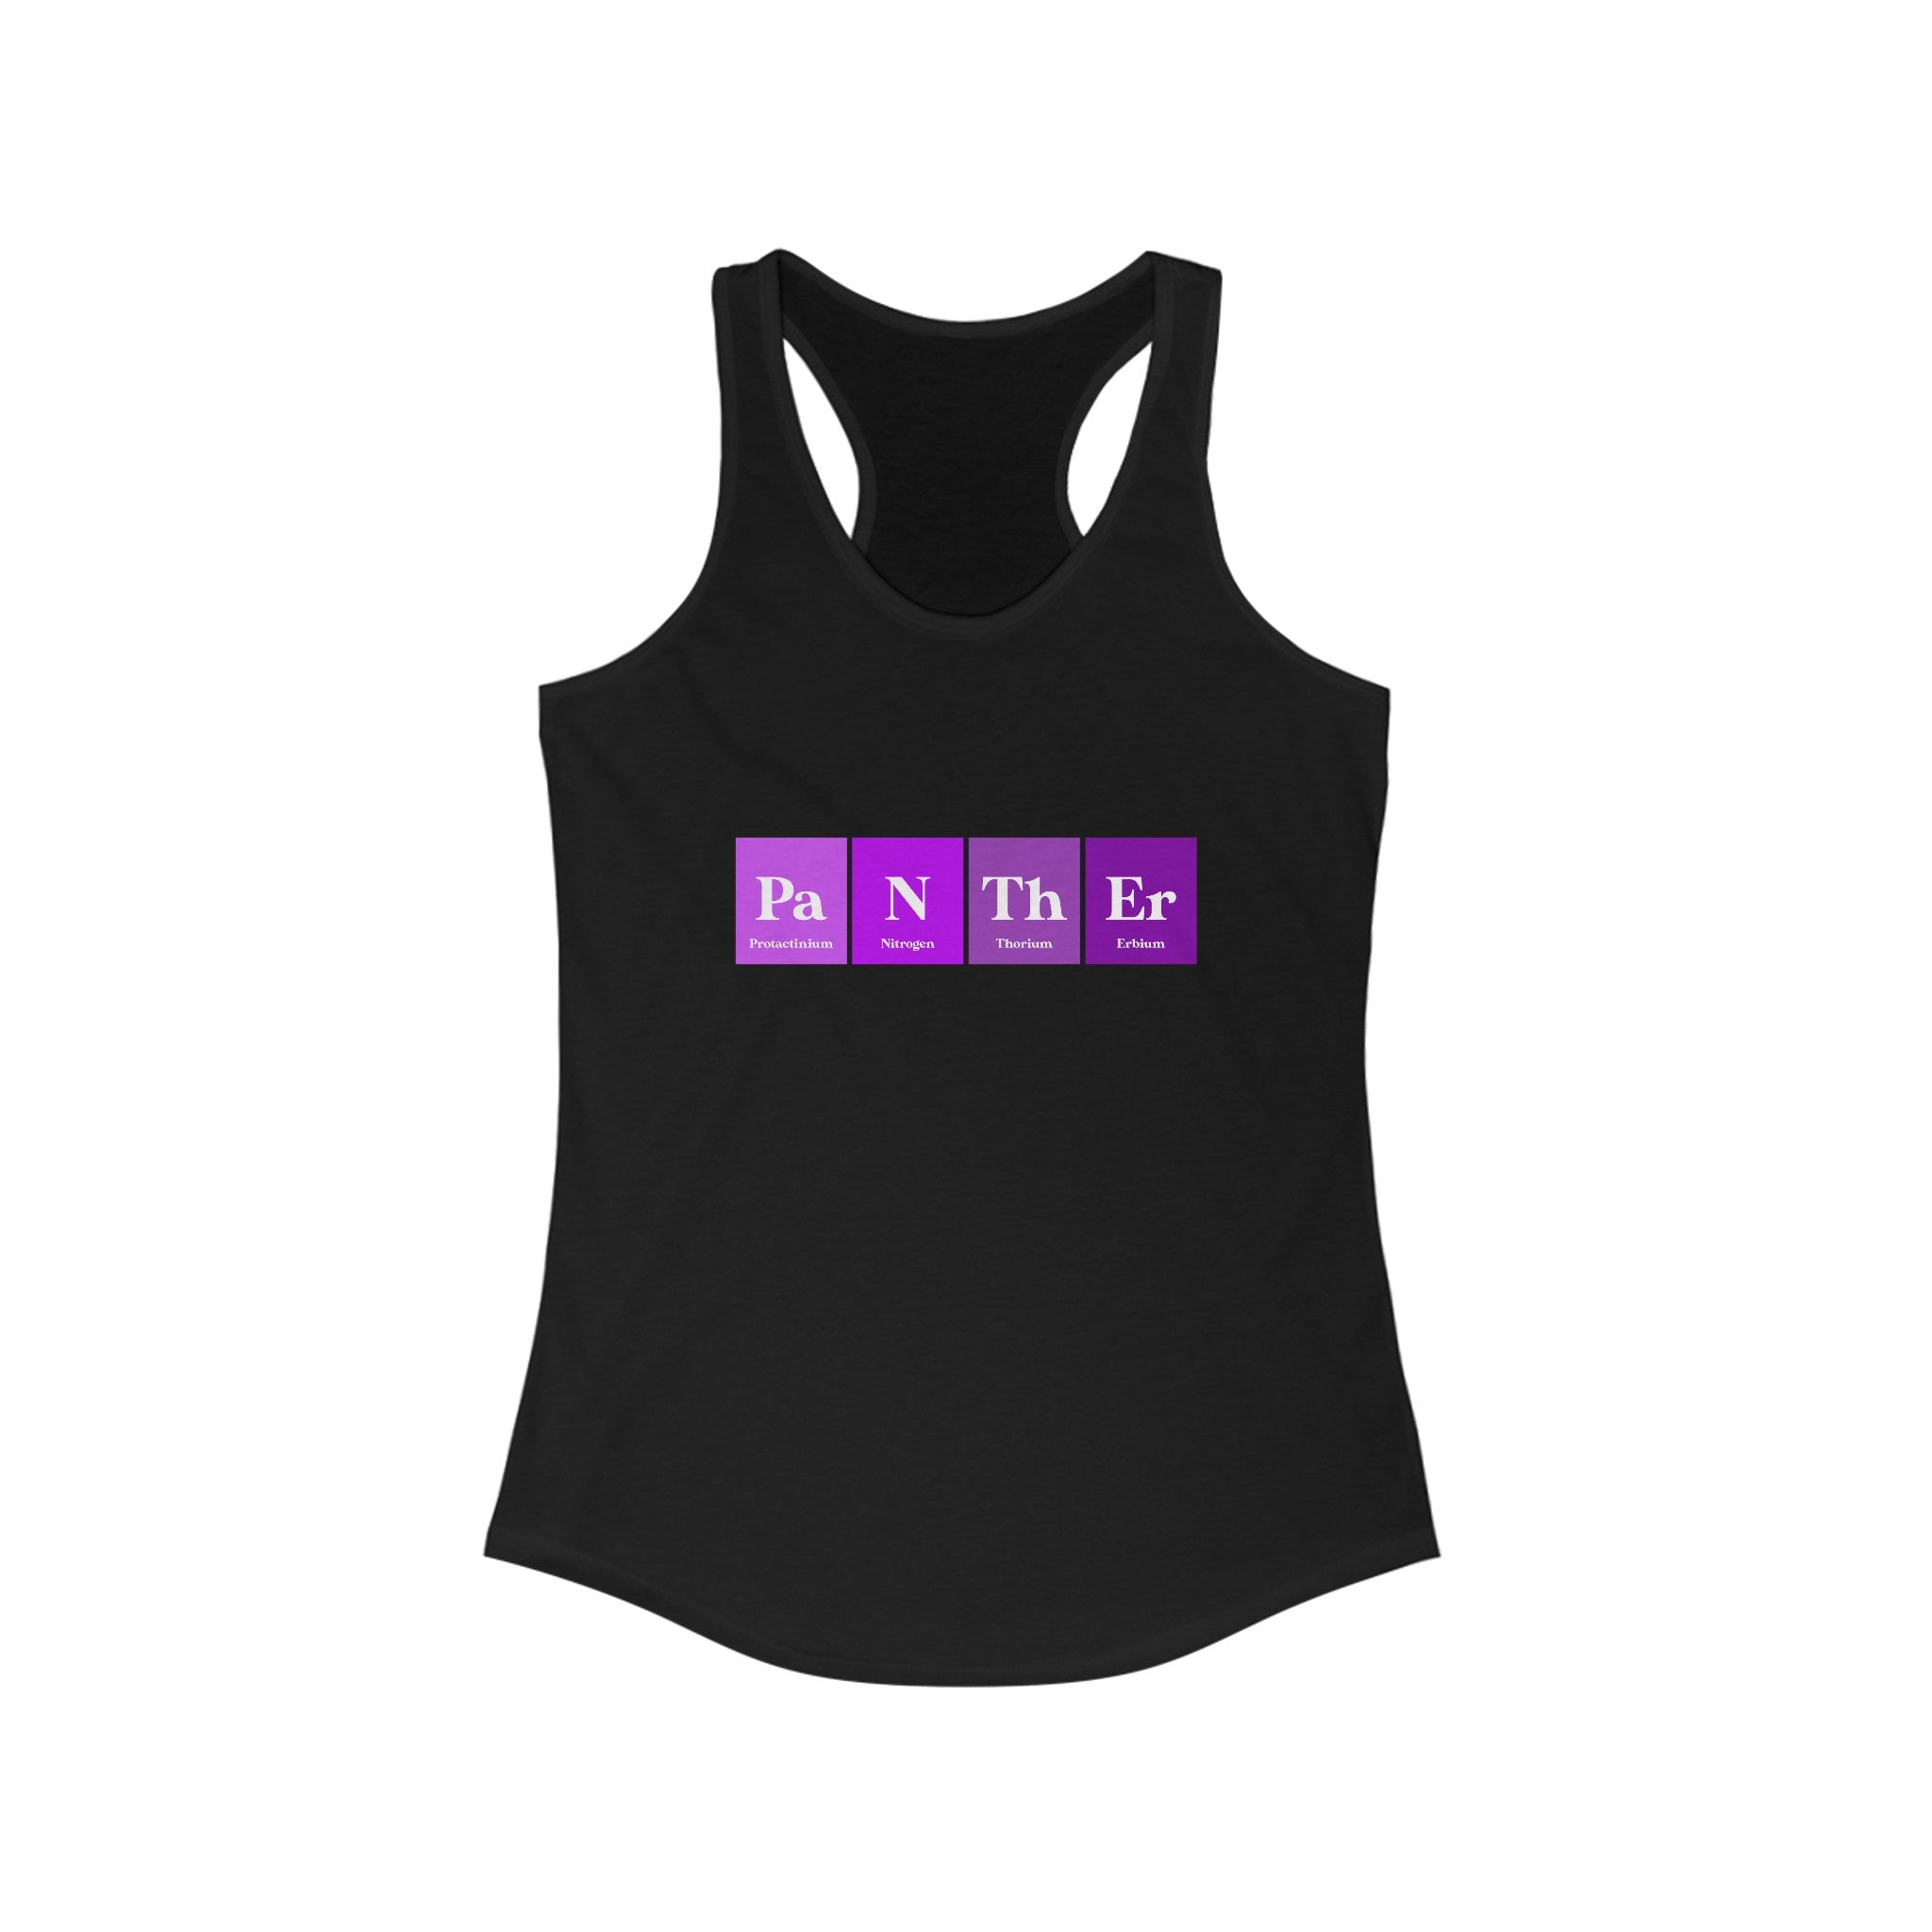 A lightweight black Pa-N-Th-Er - Women's Racerback Tank with the word "Panther" displayed in a periodic table style using purple and white elements. Perfect for fitness enthusiasts.